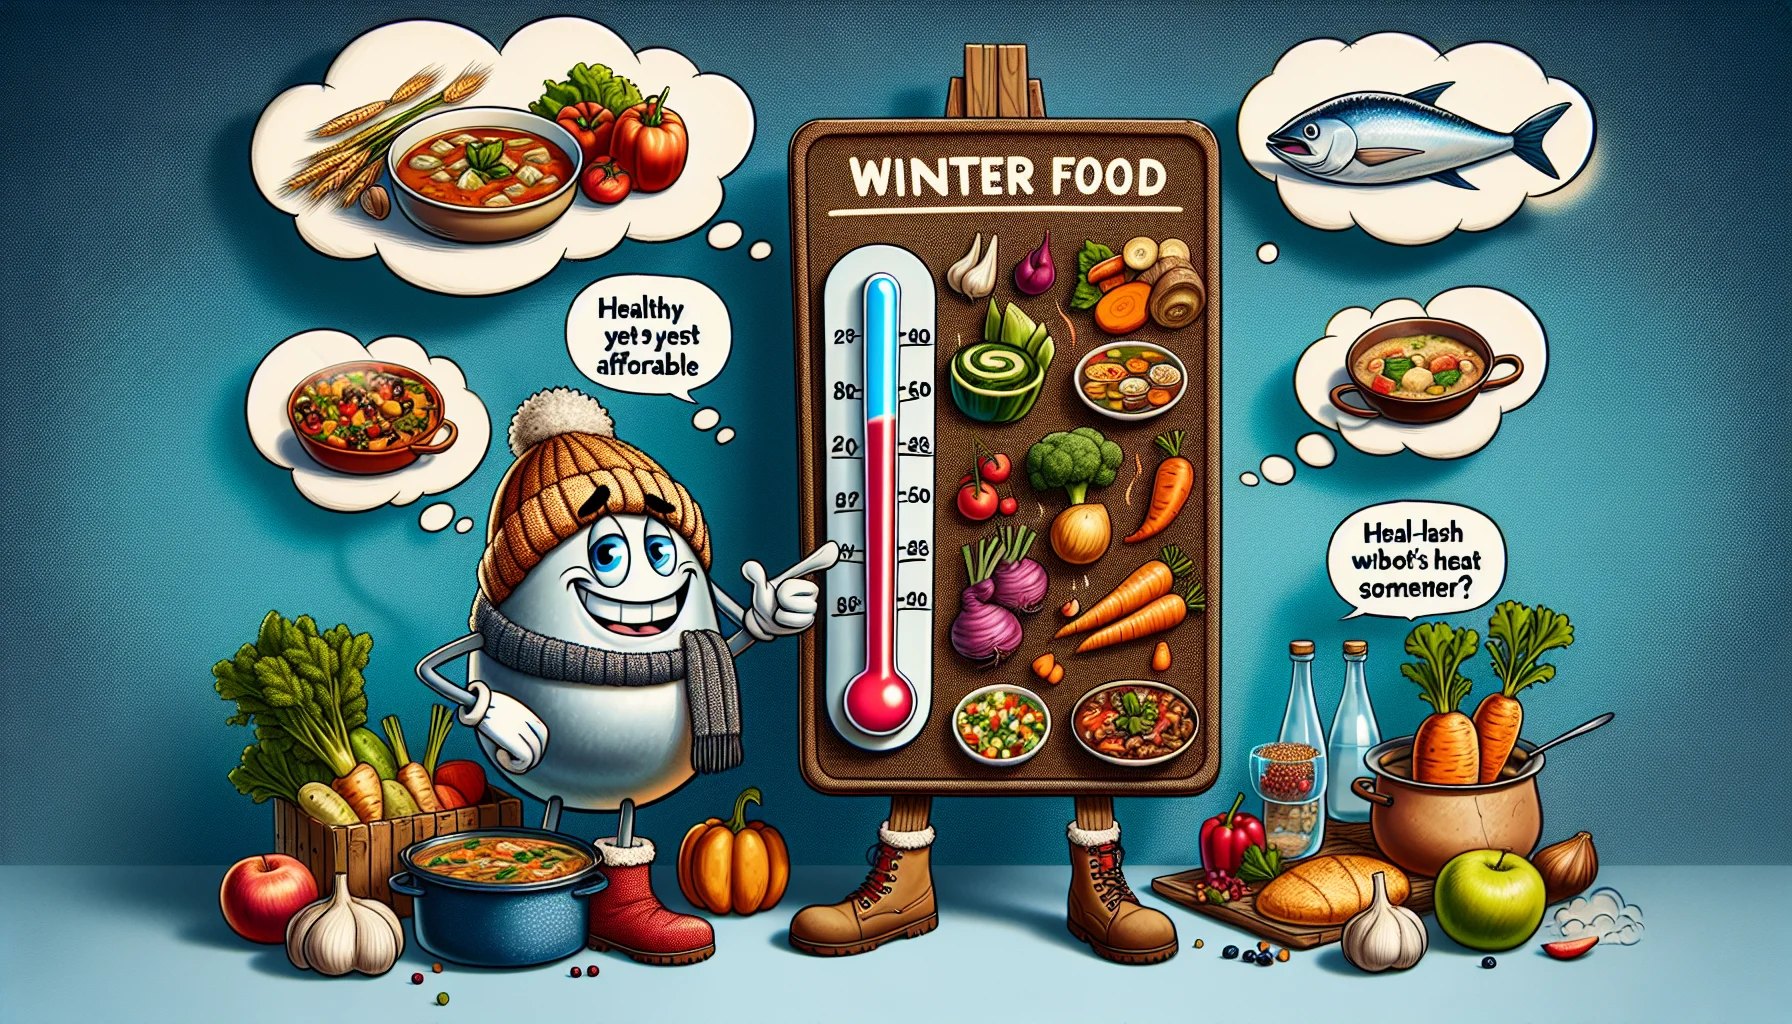 An inviting winter food menu filled with healthy yet affordable offerings, displayed in a humorous scenario. Think of a cartoonish thermometer with a broad grin, dressed in a woolen cap and a scarf, holding up the menu composed of colorful root vegetables, hearty stews, fresh fish, and whole grains. Freeze-frame comic bubbles with engaging one-liners about the affordability and health benefits of the items pop up around the scene.